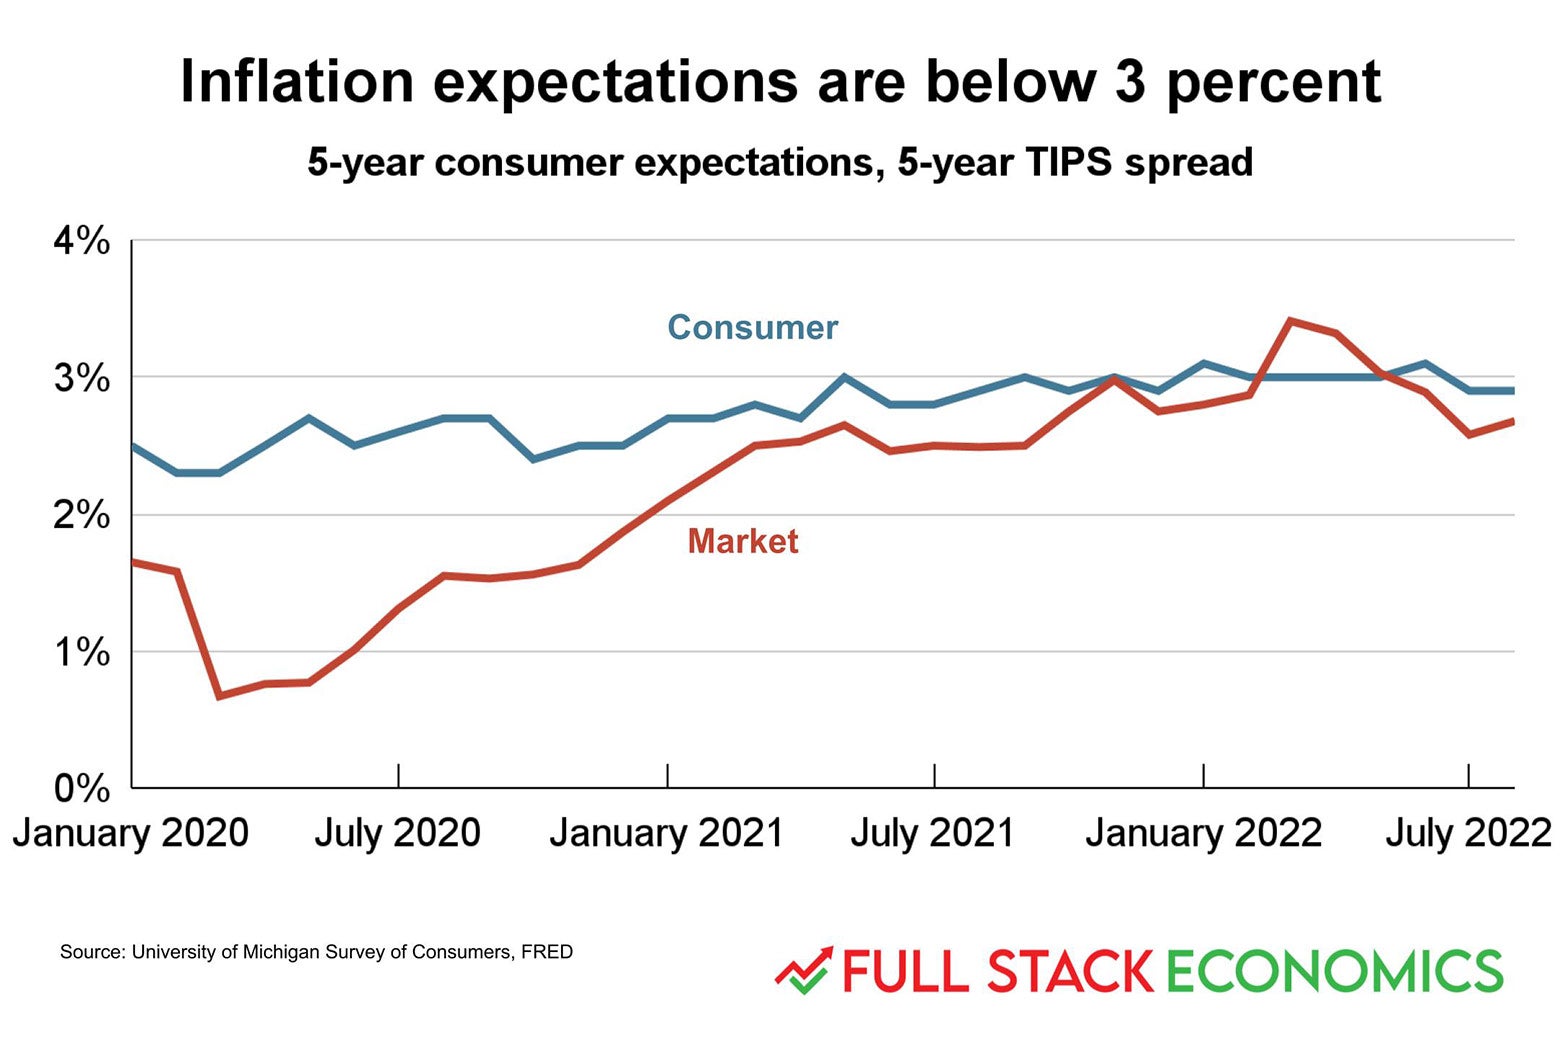 A chart showing consumer vs. market expectations for inflation.